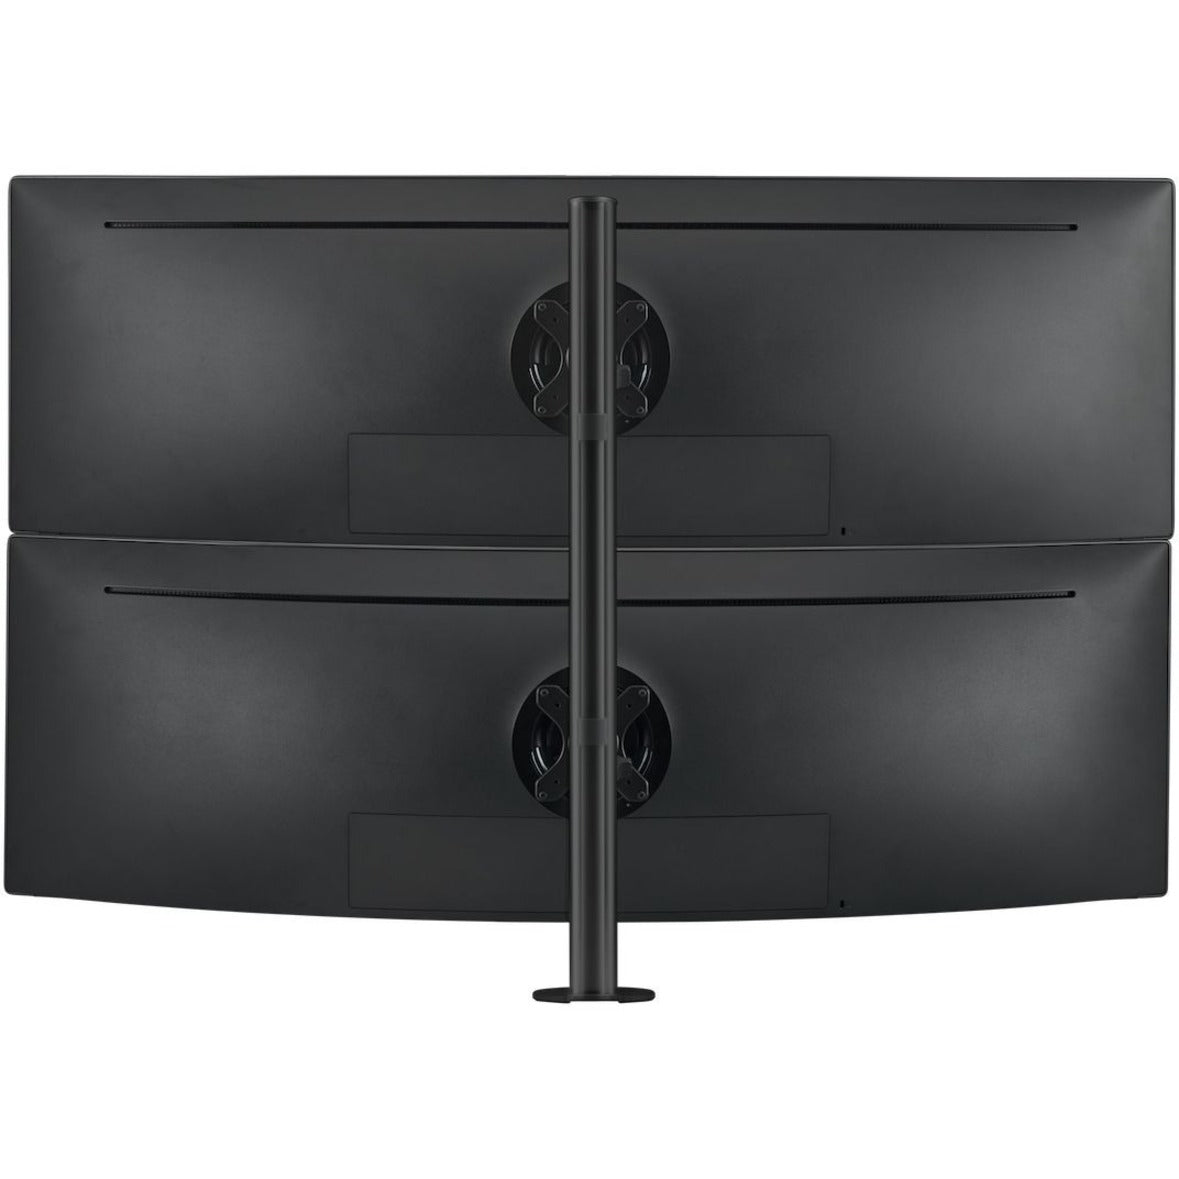 Atdec AWMS-2-LTH75-H-B Post Mounted Dual Display Stand, Adjustable, Heavy Duty, Cable Management